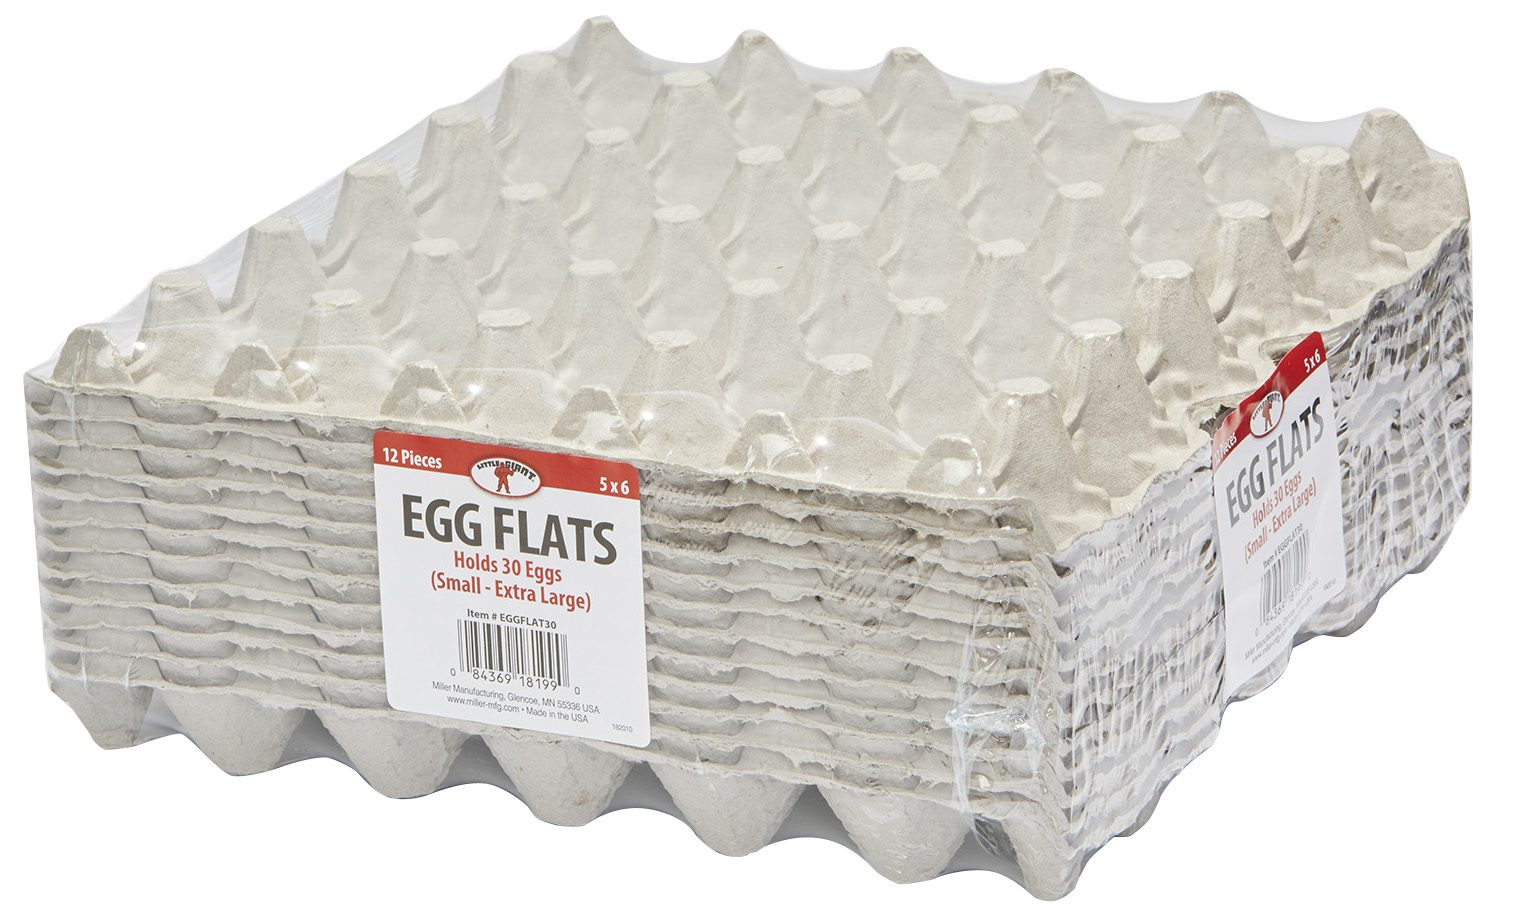 Egg Flats 30 Count 5 x 6 Package of 12